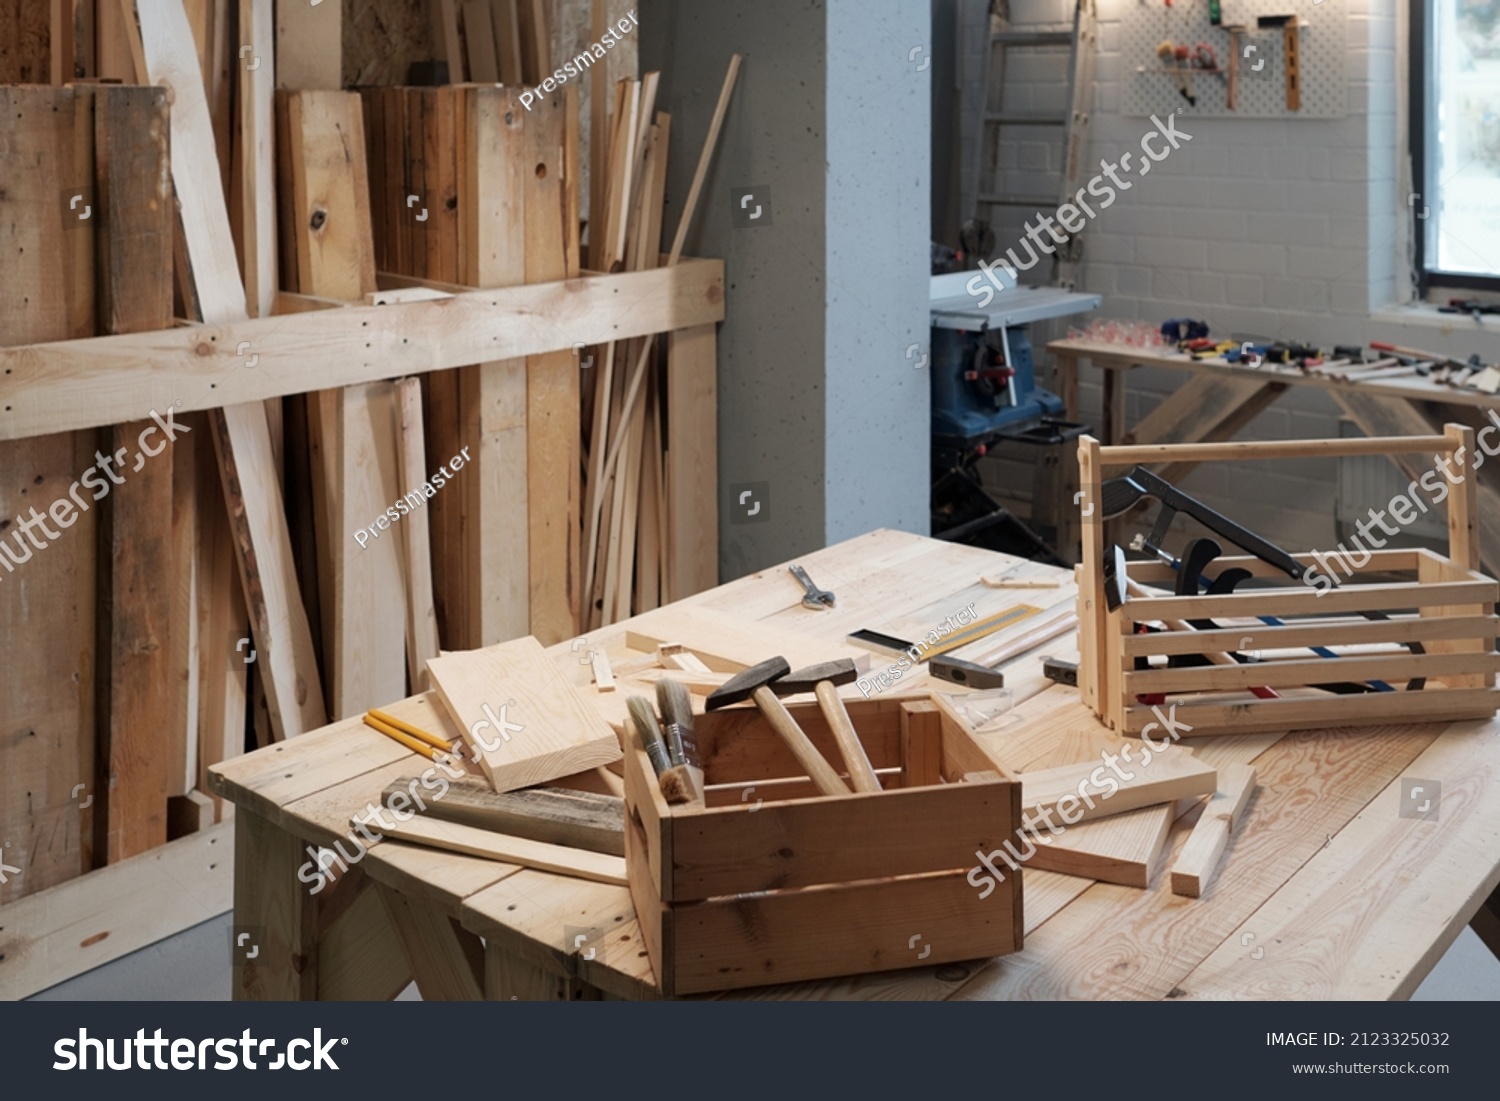 Background image of carpentry workshop with focus on wooden tool boxes in foreground, copy space #2123325032